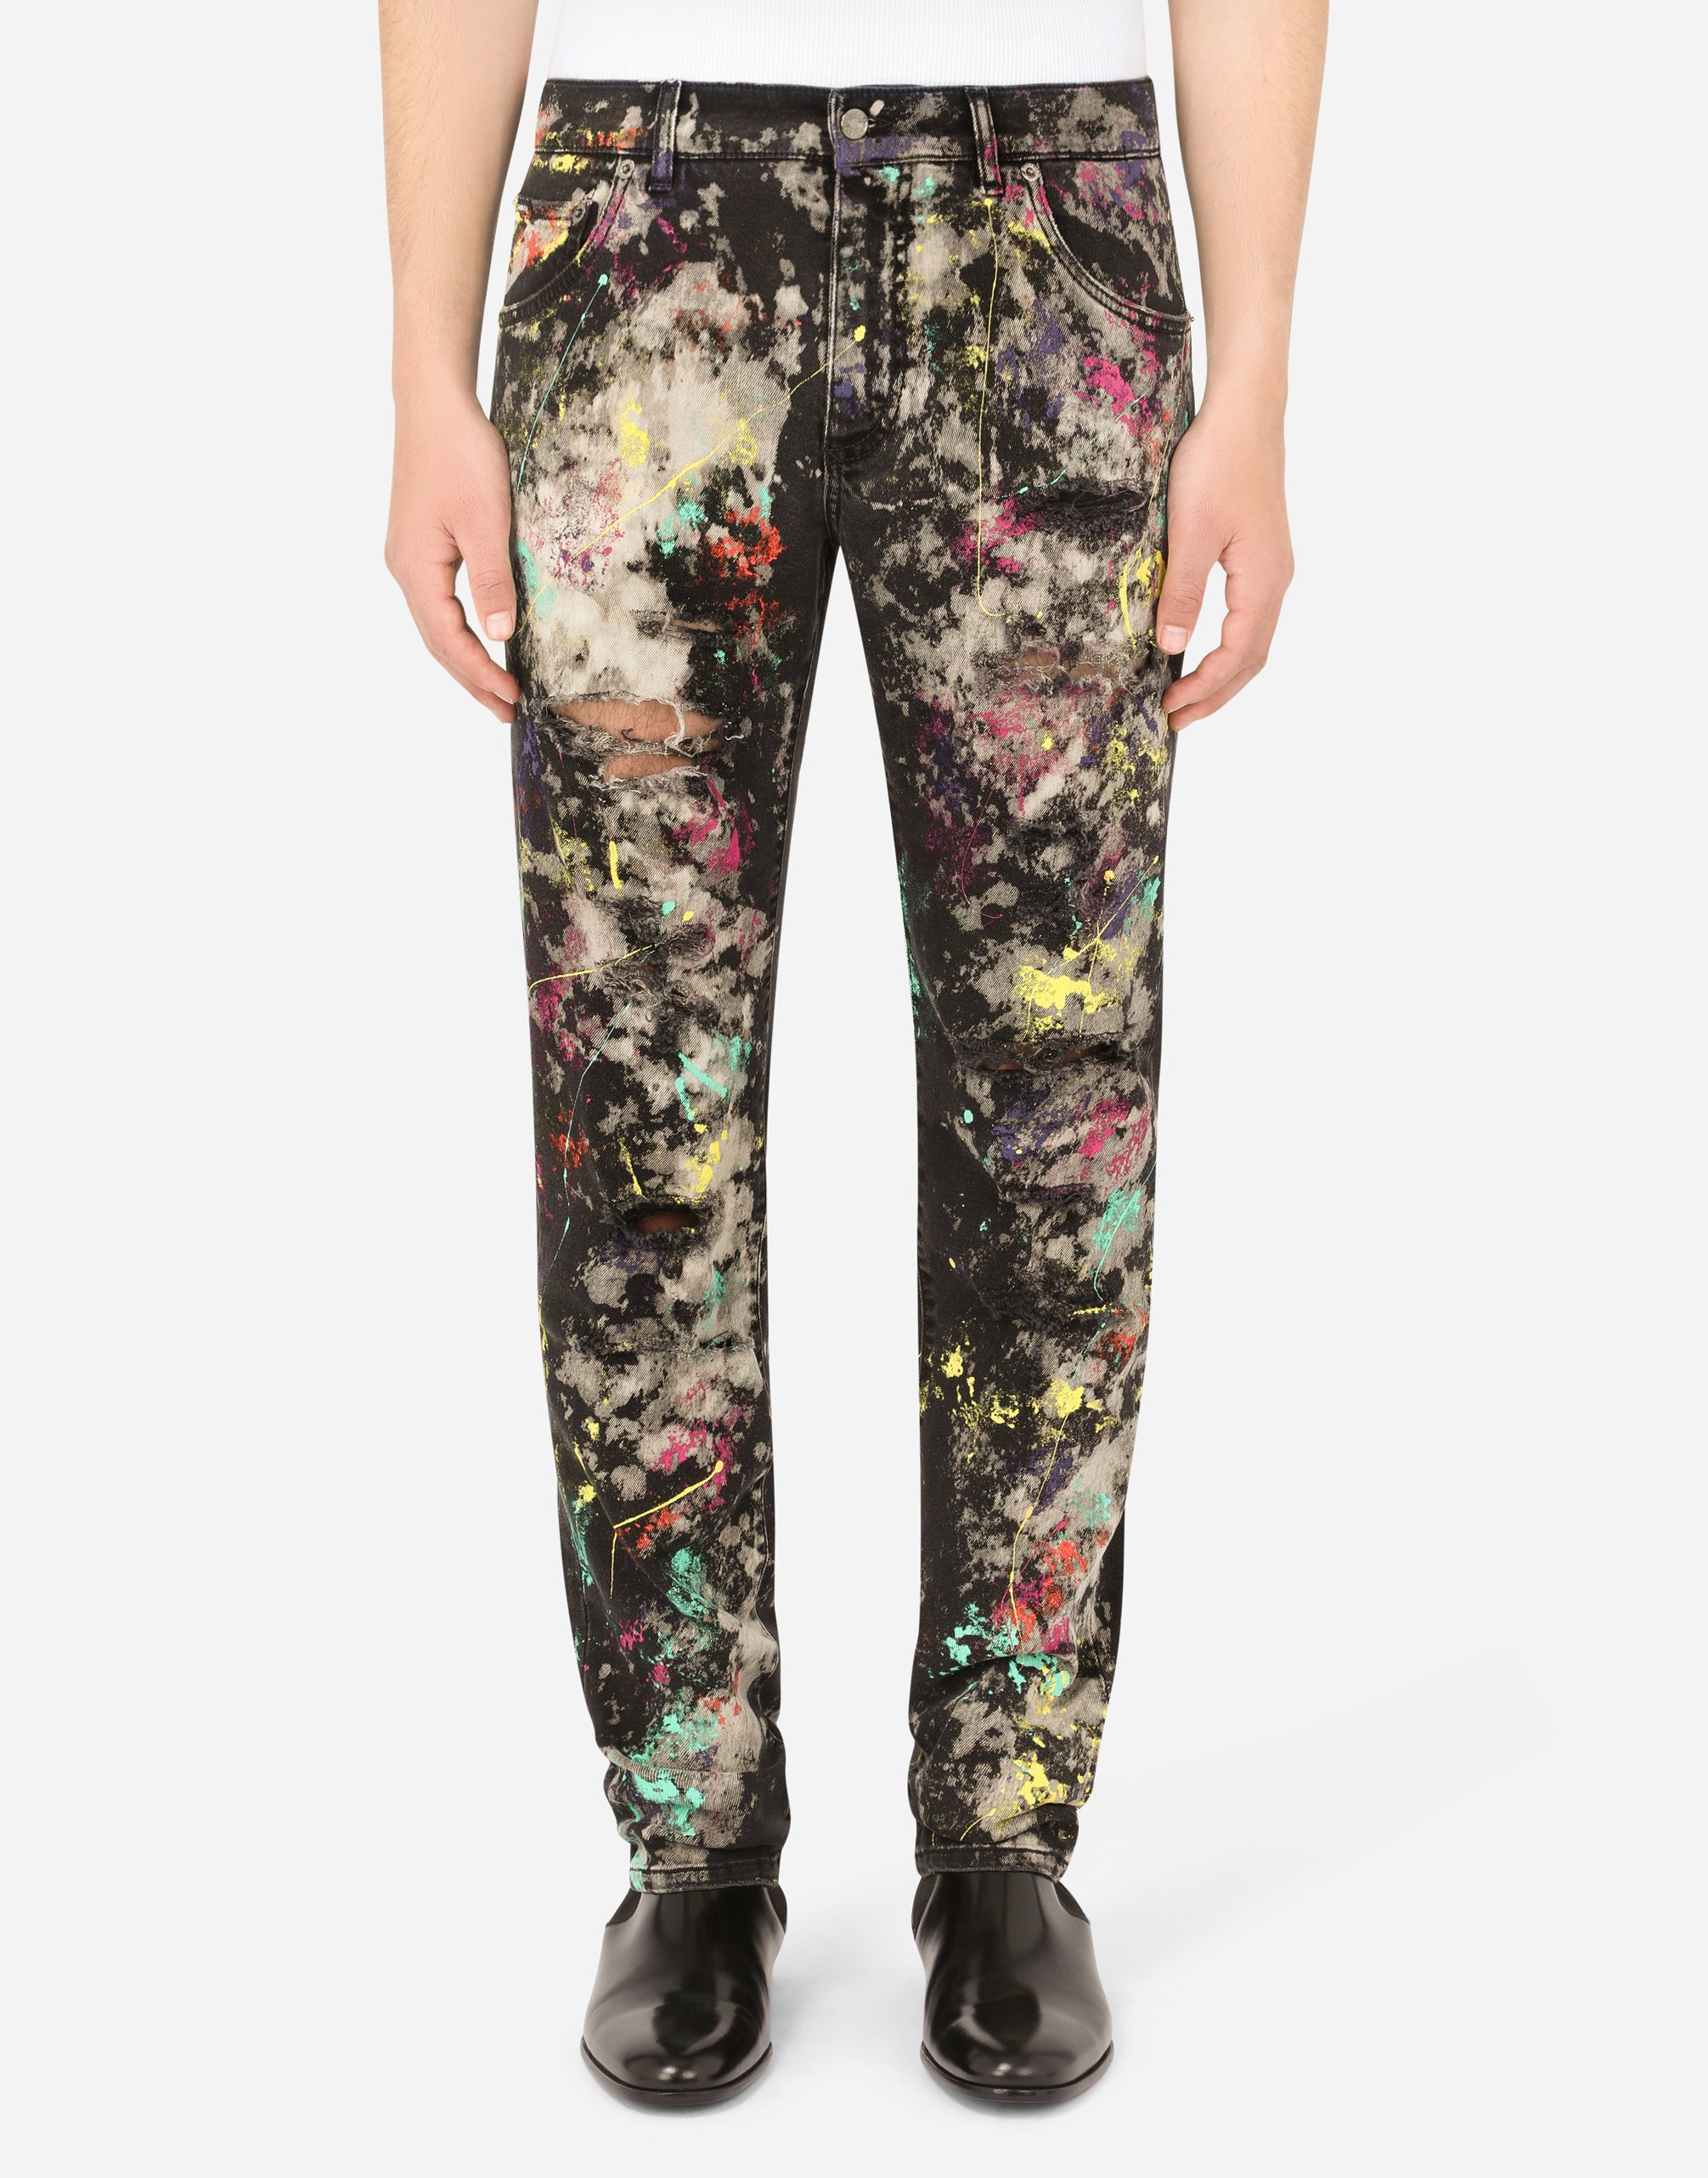 Slim-fit black stretch jeans with marbled print in Multicolor